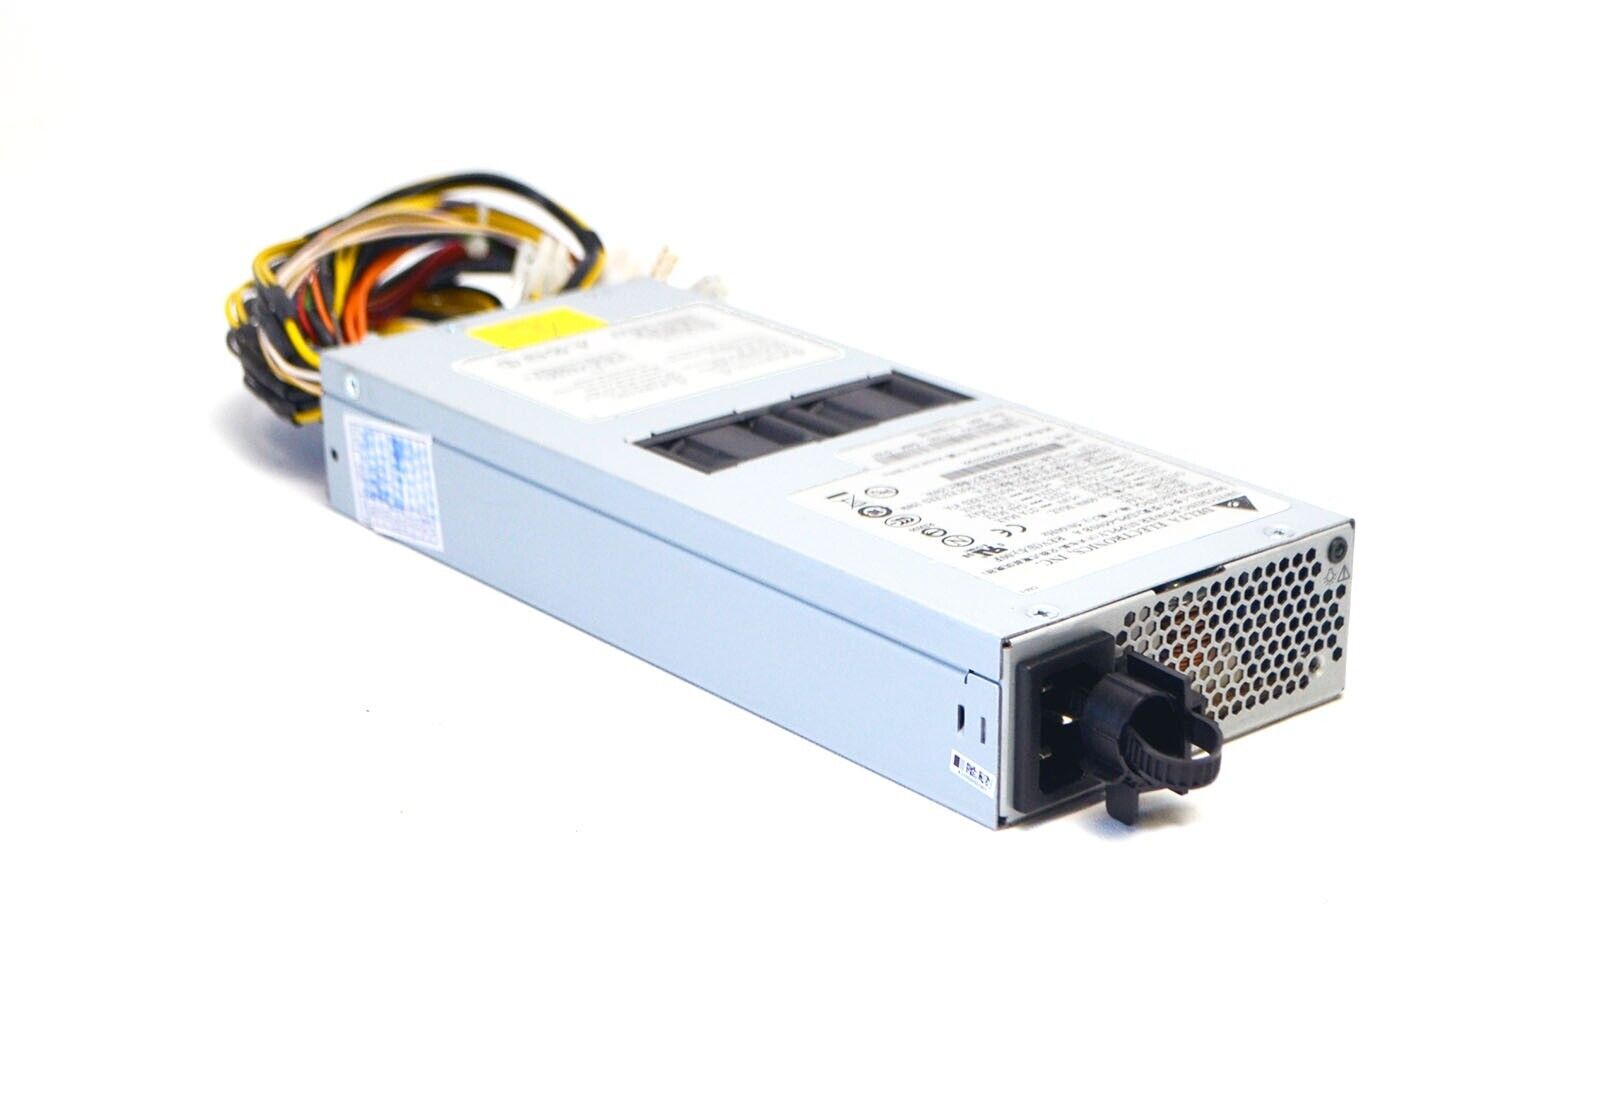 New OEM Dell 8M1HJ 650W Power Supply DPS-650SB A for PowerEdge C1100 Server